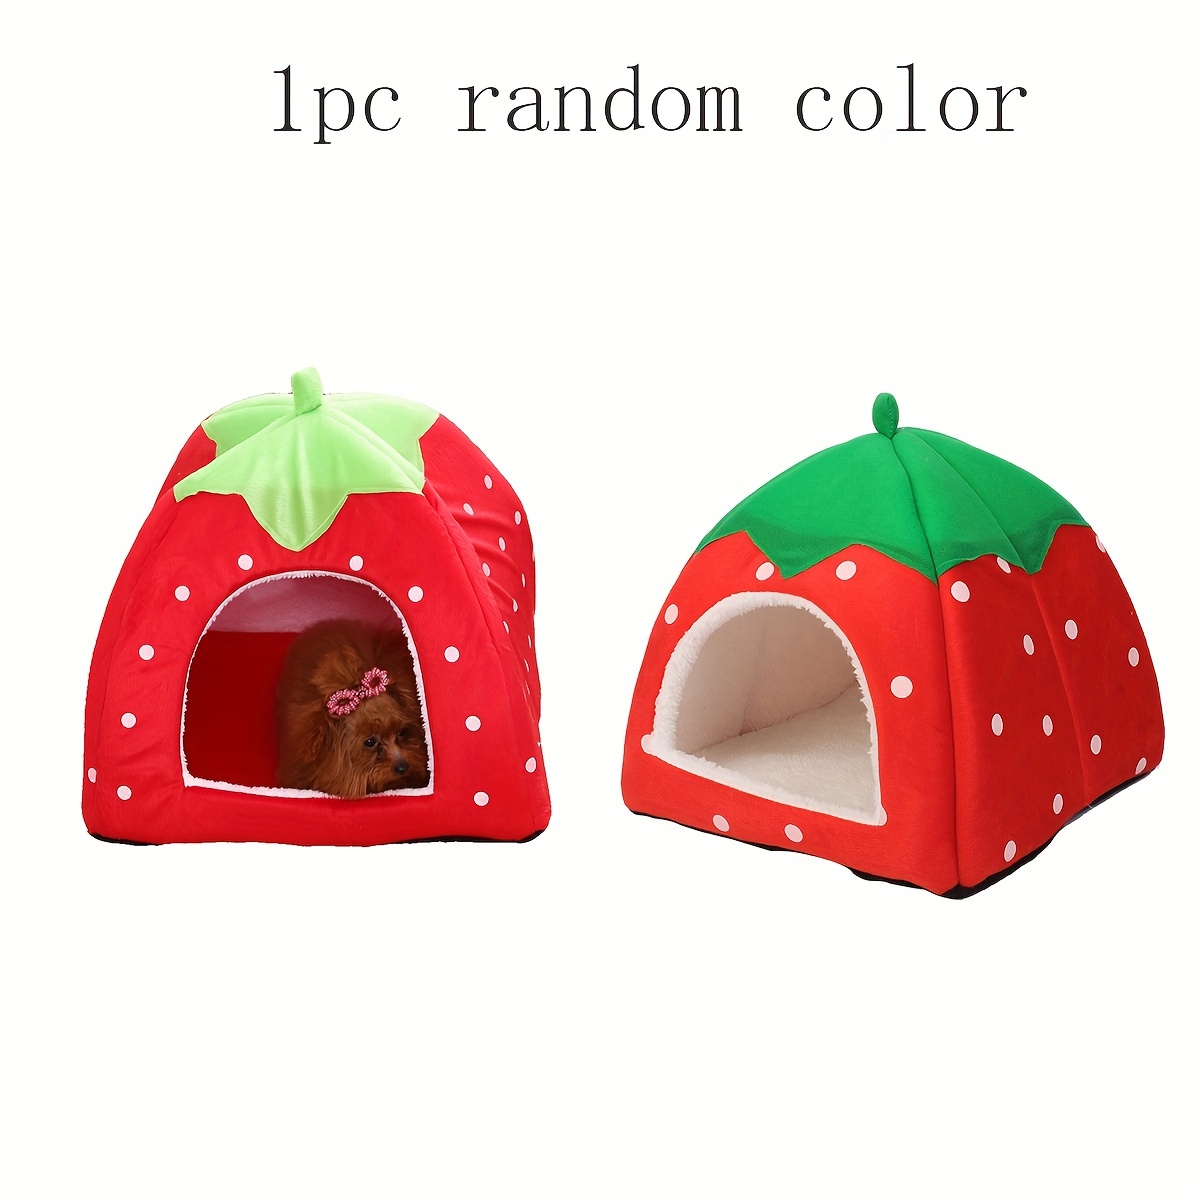 

1pc Soft Warm Pet Bed For Small Animals, Winter Strawberry Tent House, Cozy Mongolian Yurt Style, Assorted Color